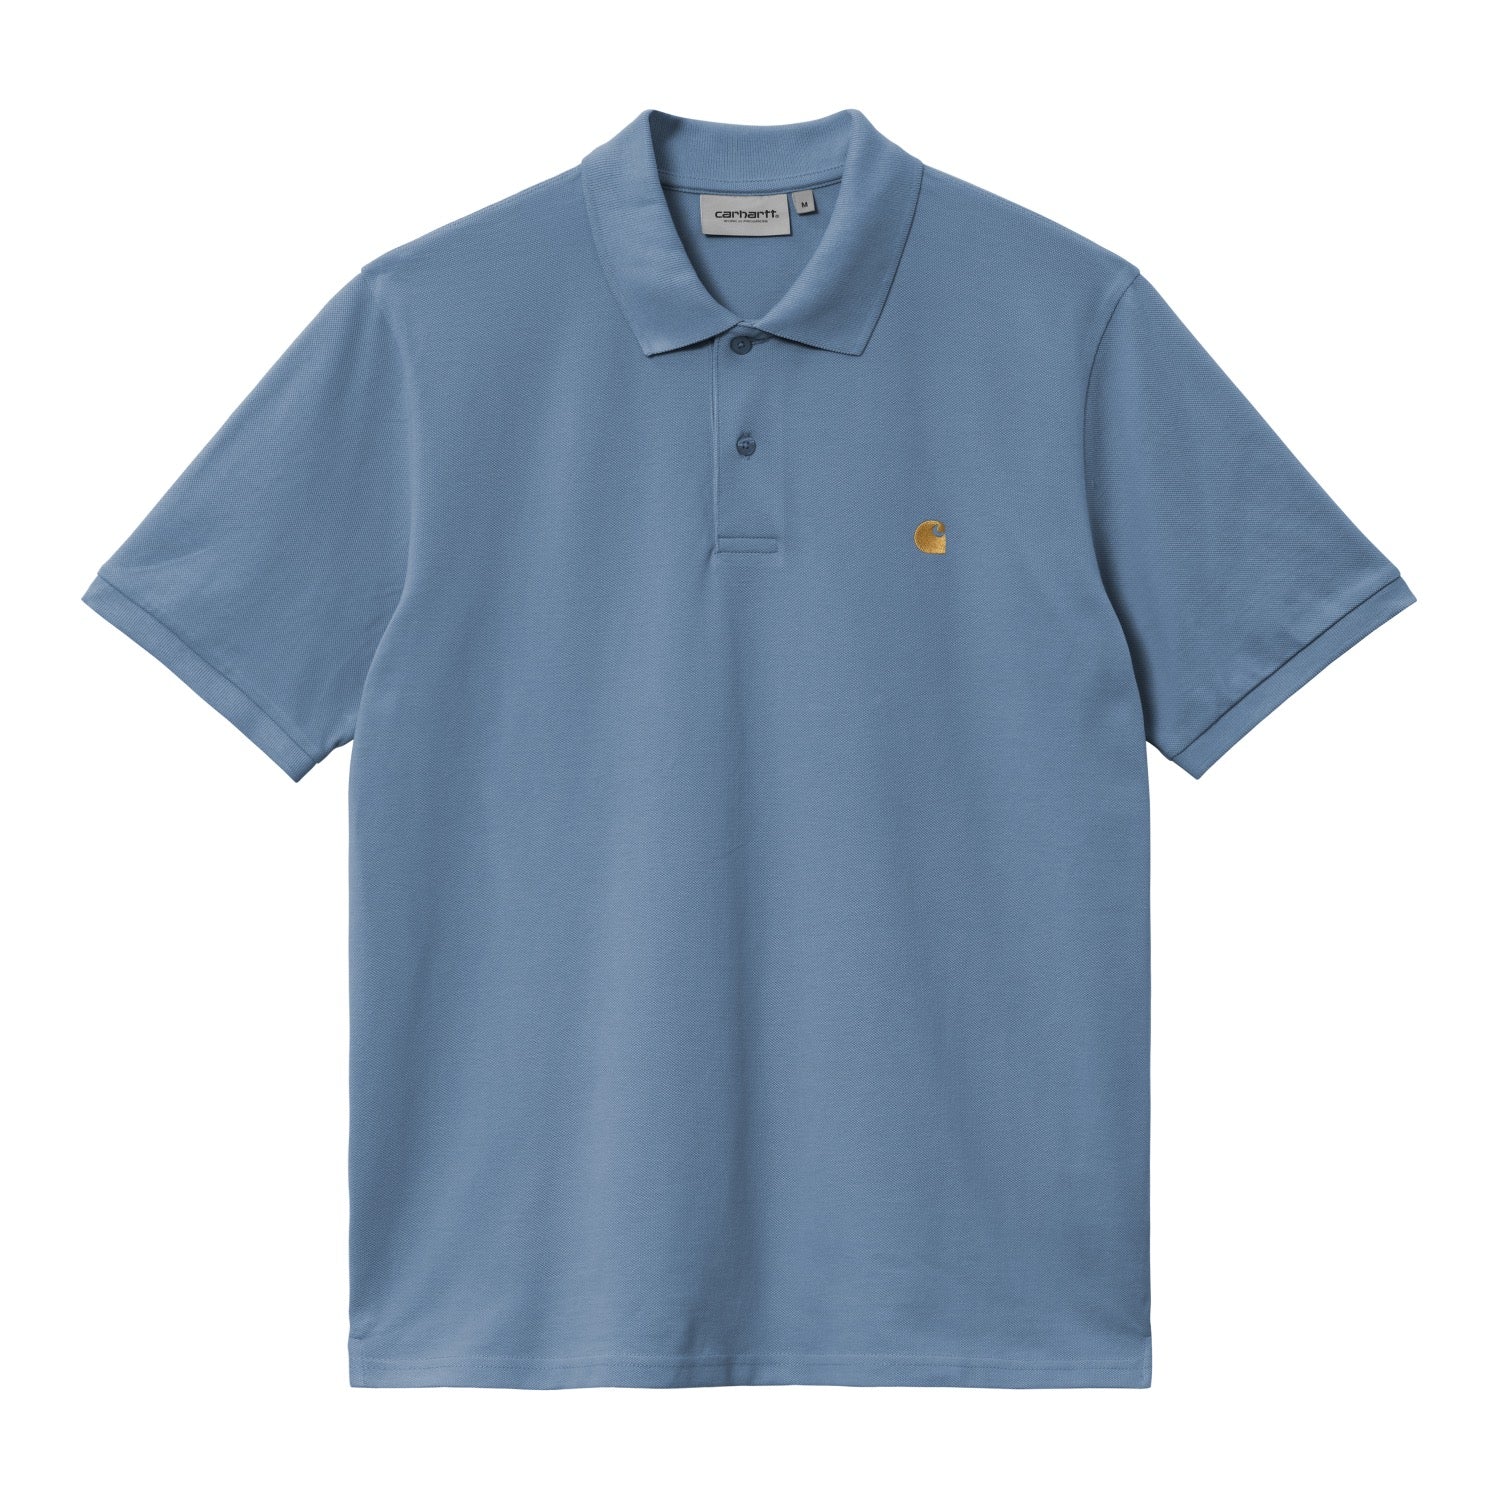 S/S CHASE PIQUE POLO - Sorrent / Gold